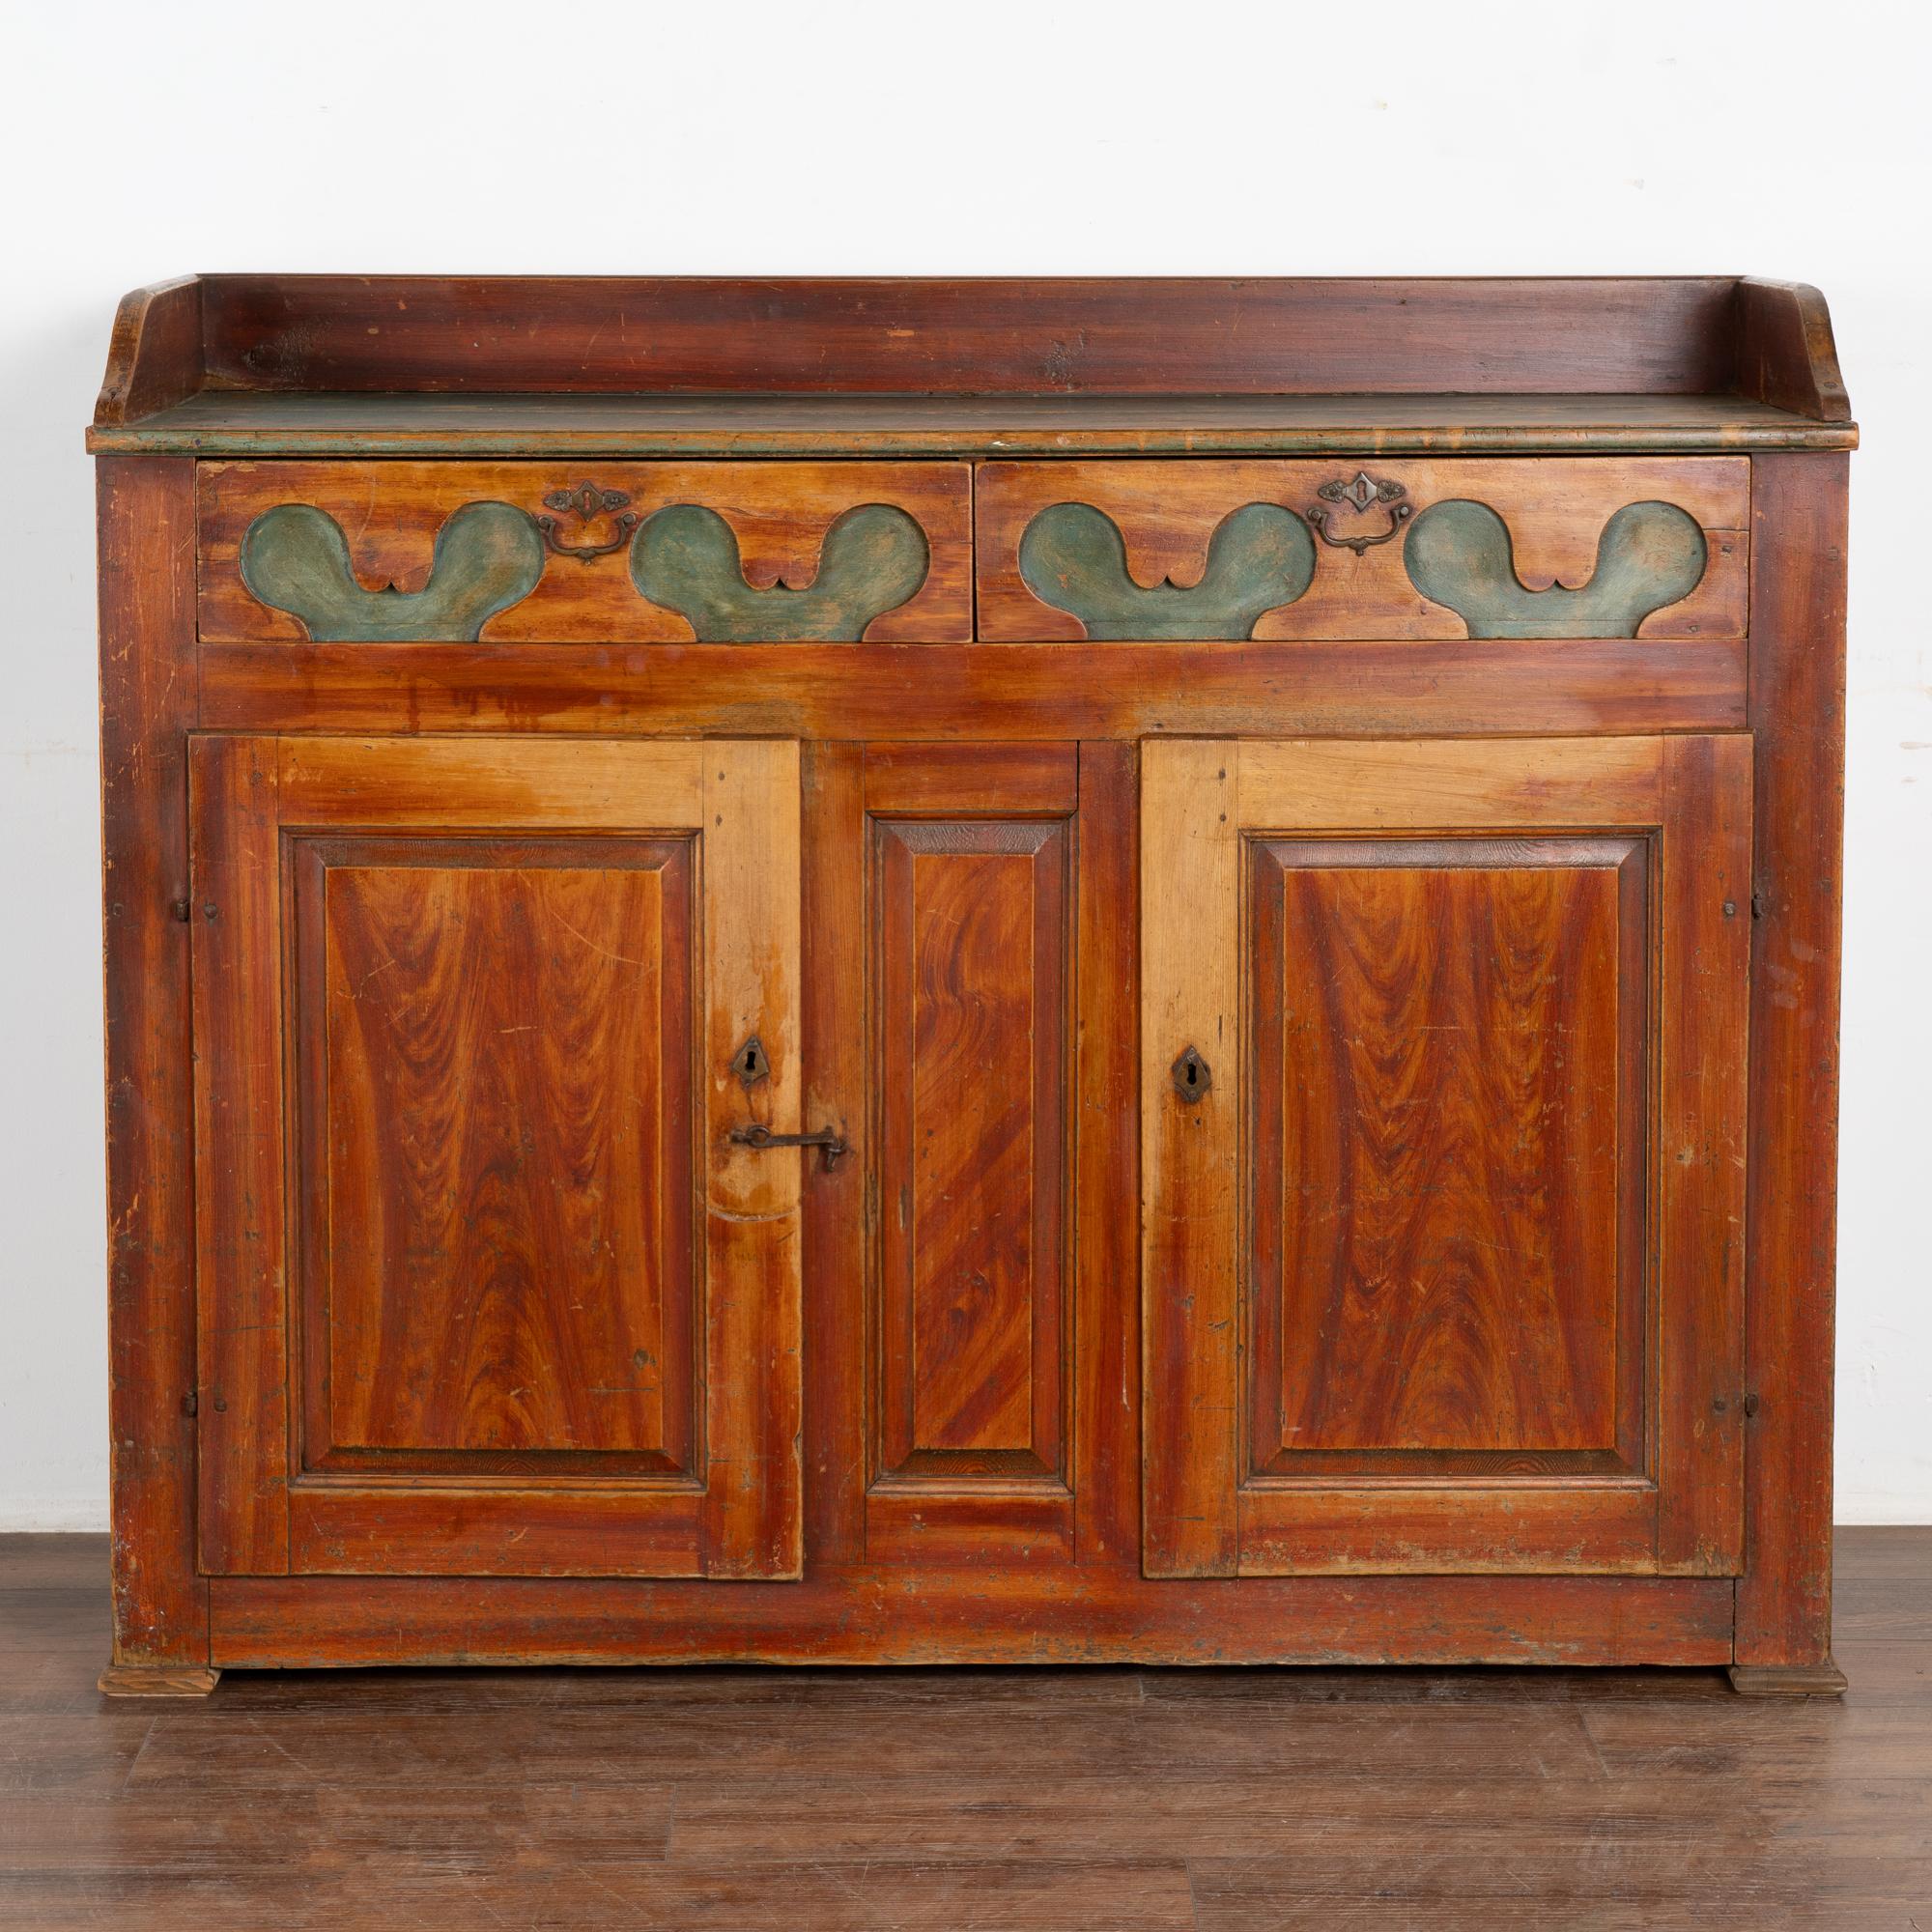 Swedish Original Painted Sideboard Cabinet from Sweden, circa 1820-40 For Sale